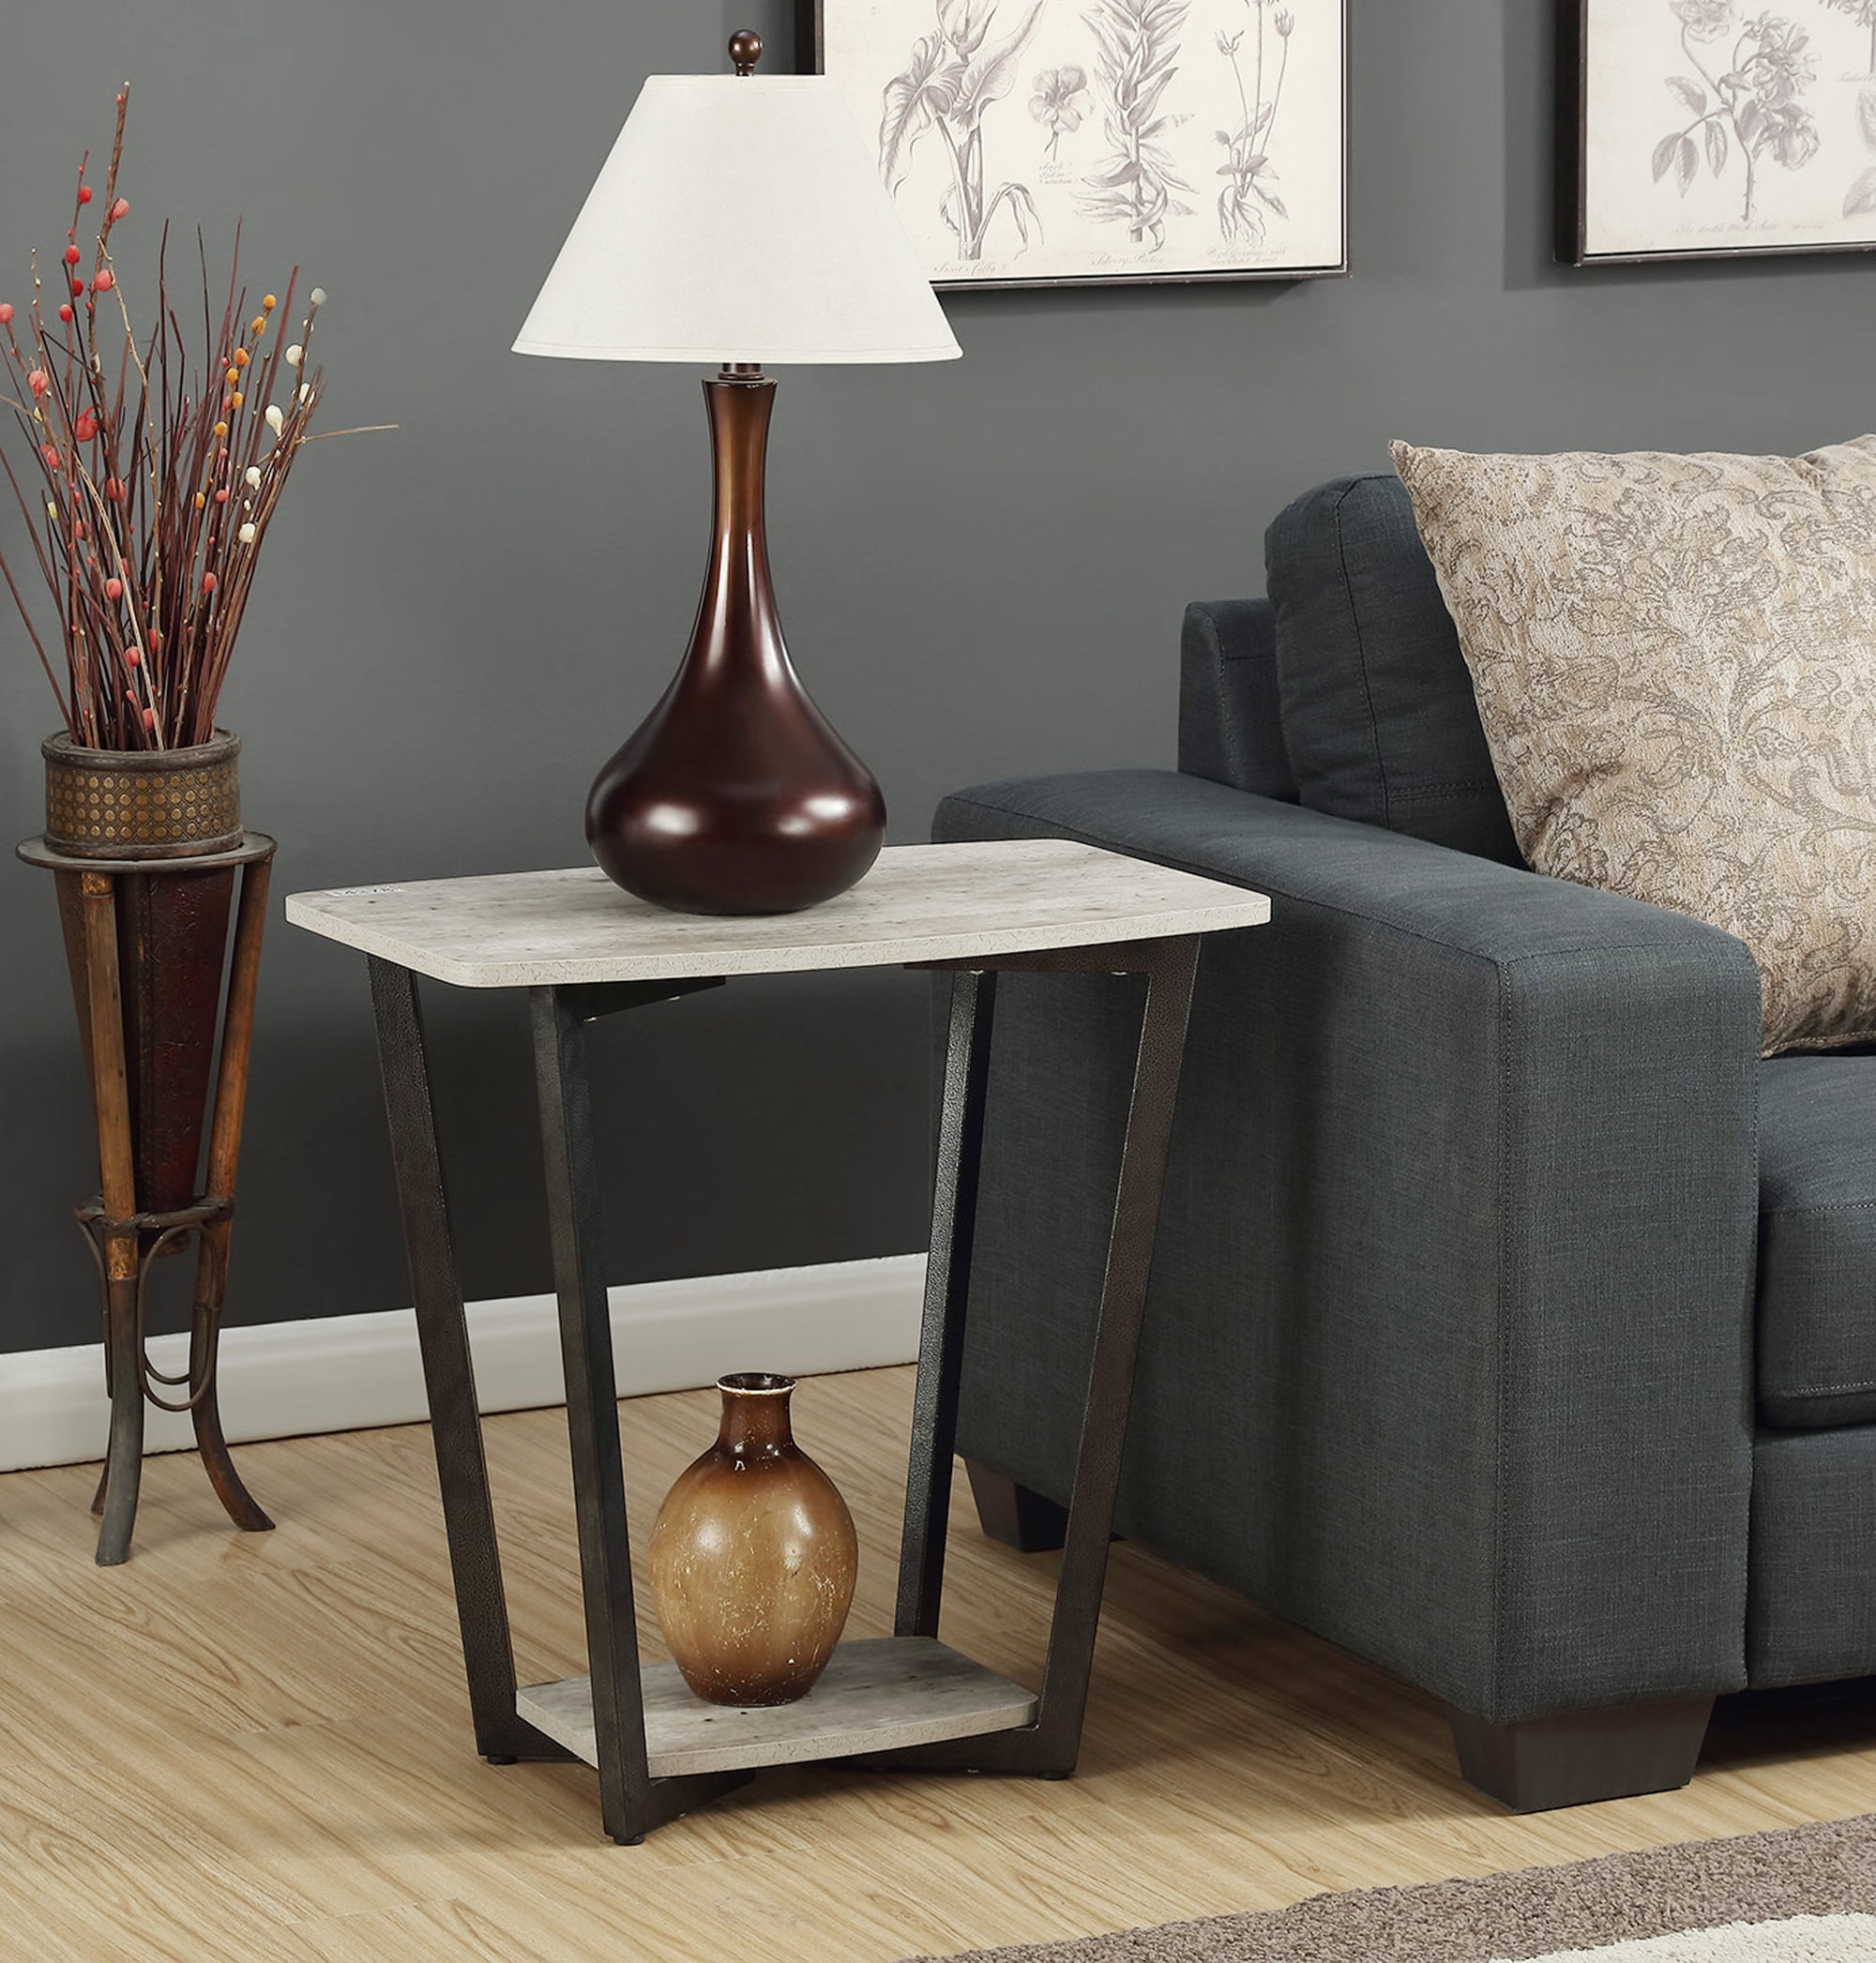 111245gy End Table, Faux Birch - 23.75 X 14 X 23.75 In.